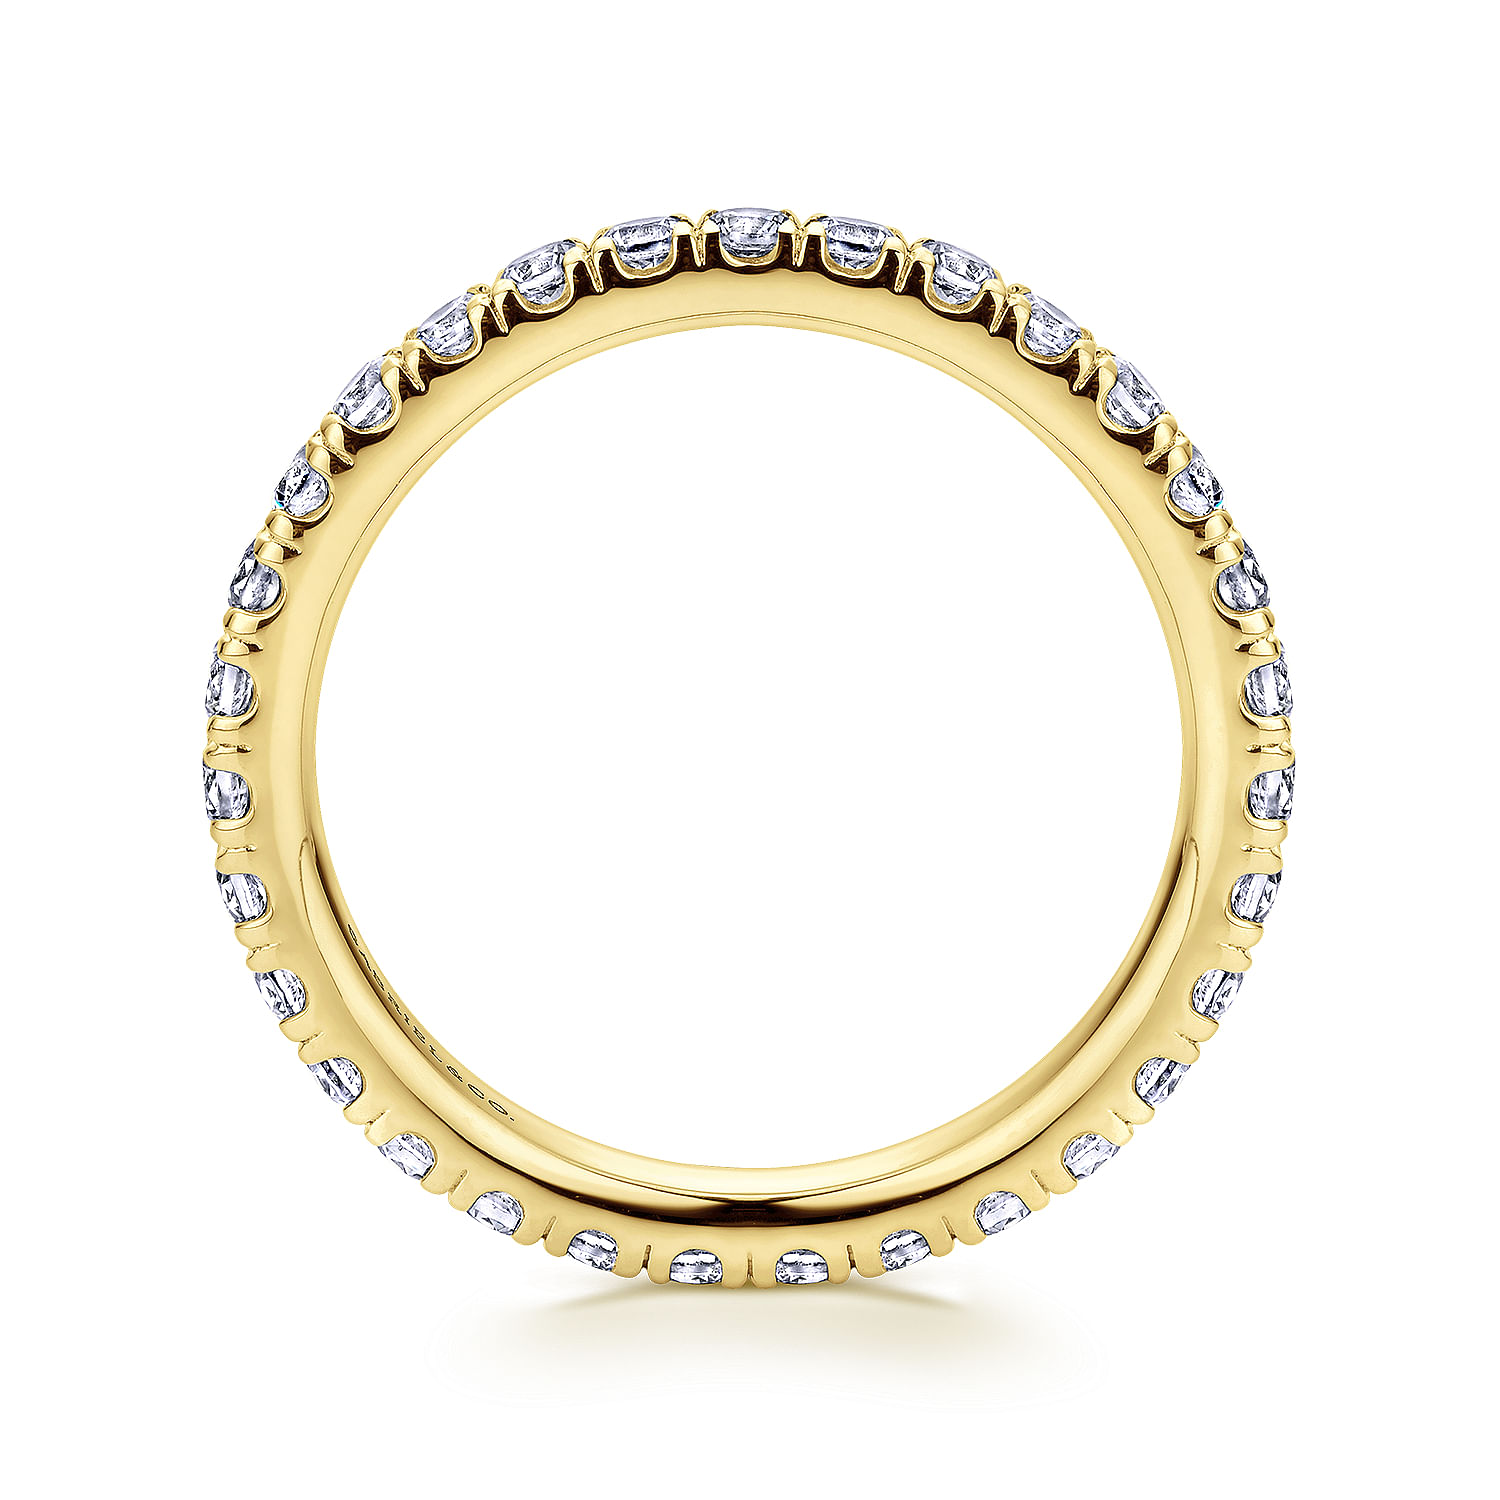 Avignon - French Pave  Eternity Diamond Ring in 14K Yellow Gold - 1.05 ct - Shot 2